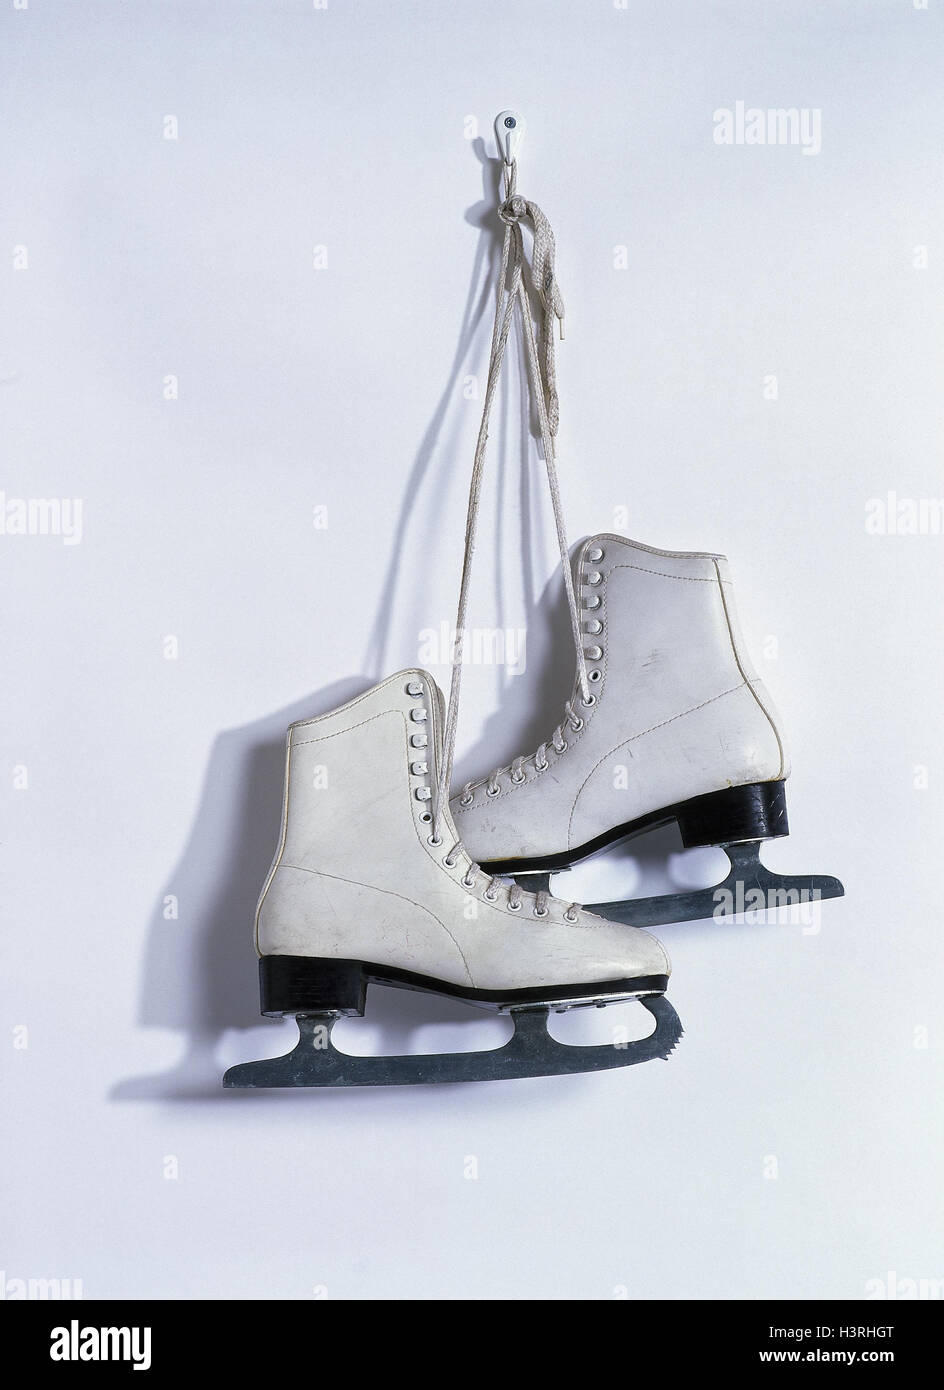 Wall, hook, ice skates, white skating shoes, sport, skating, go skating, 'give up', leisure time, hobby, winter sports, product photography, stilllife, studio Stock Photo